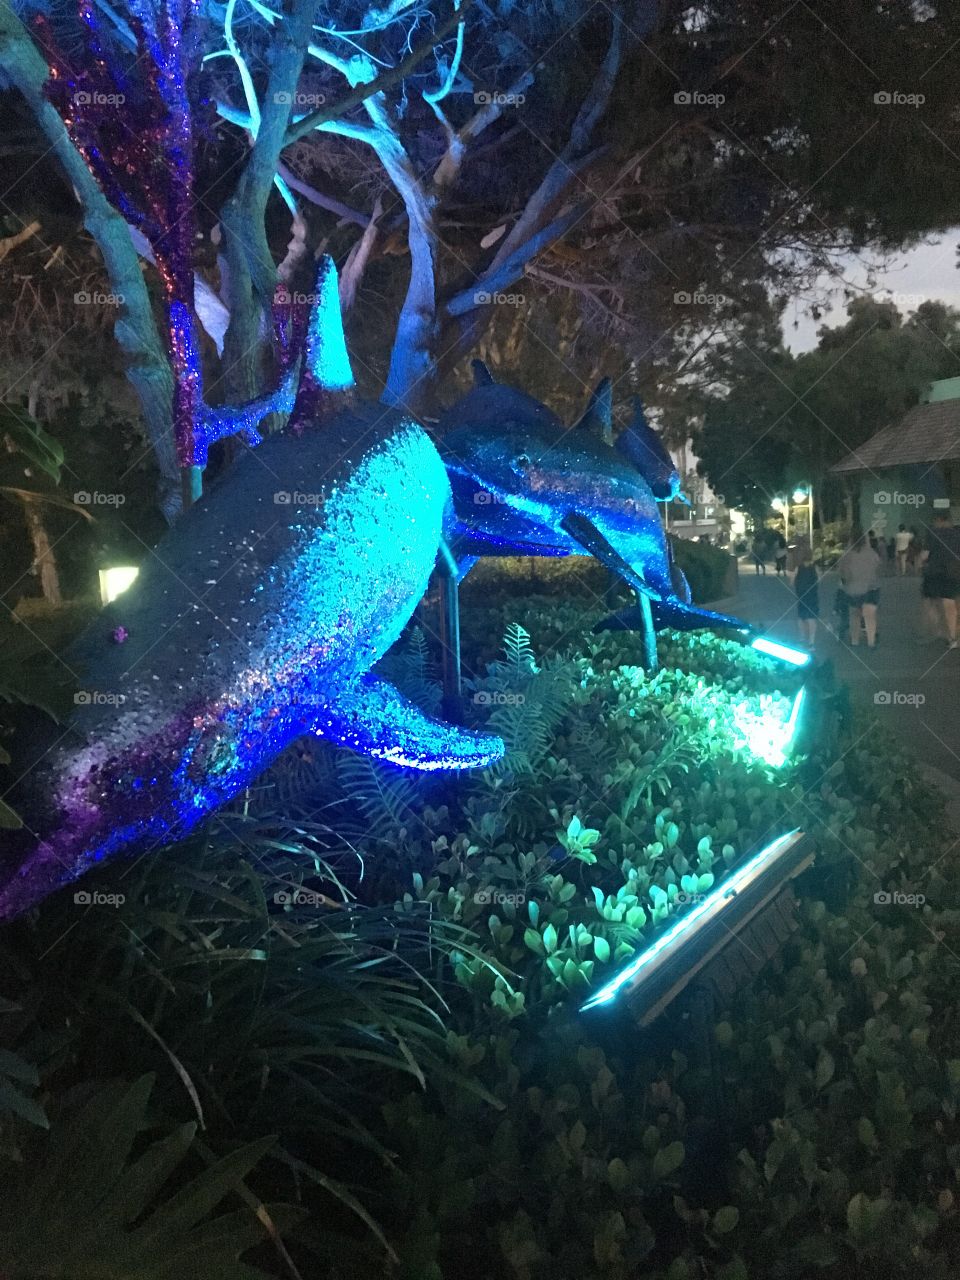 Dolphins play in the moonlight garden. 